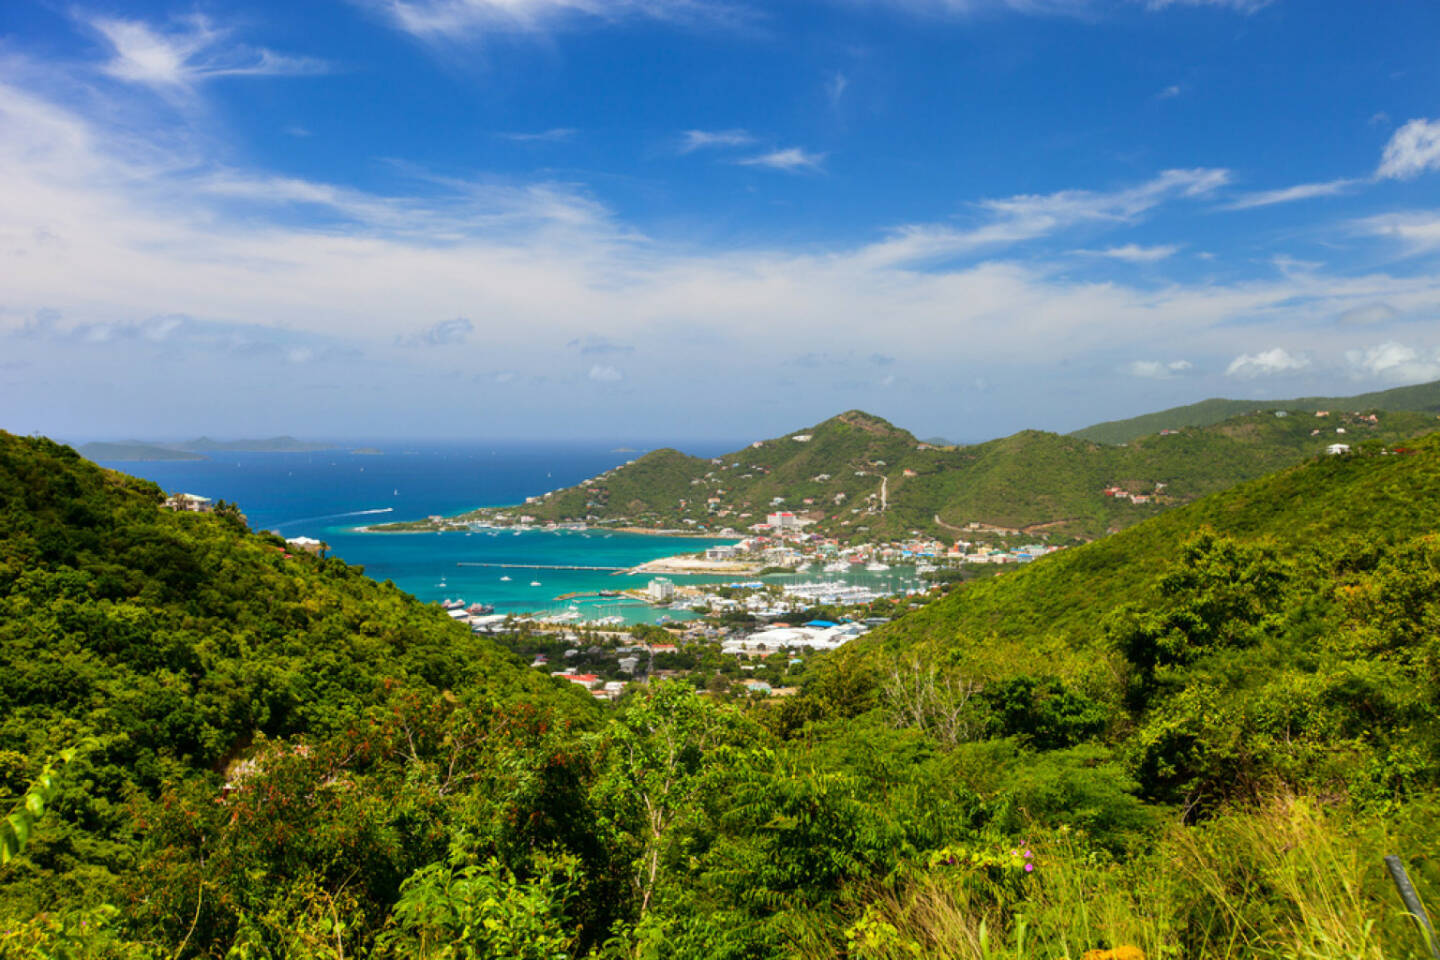 Britische Jungferninseln, Road Town, http://www.shutterstock.com/de/pic-207336373/stock-photo-aerial-view-of-road-town-on-tortola-the-capital-of-british-virgin-islands.html